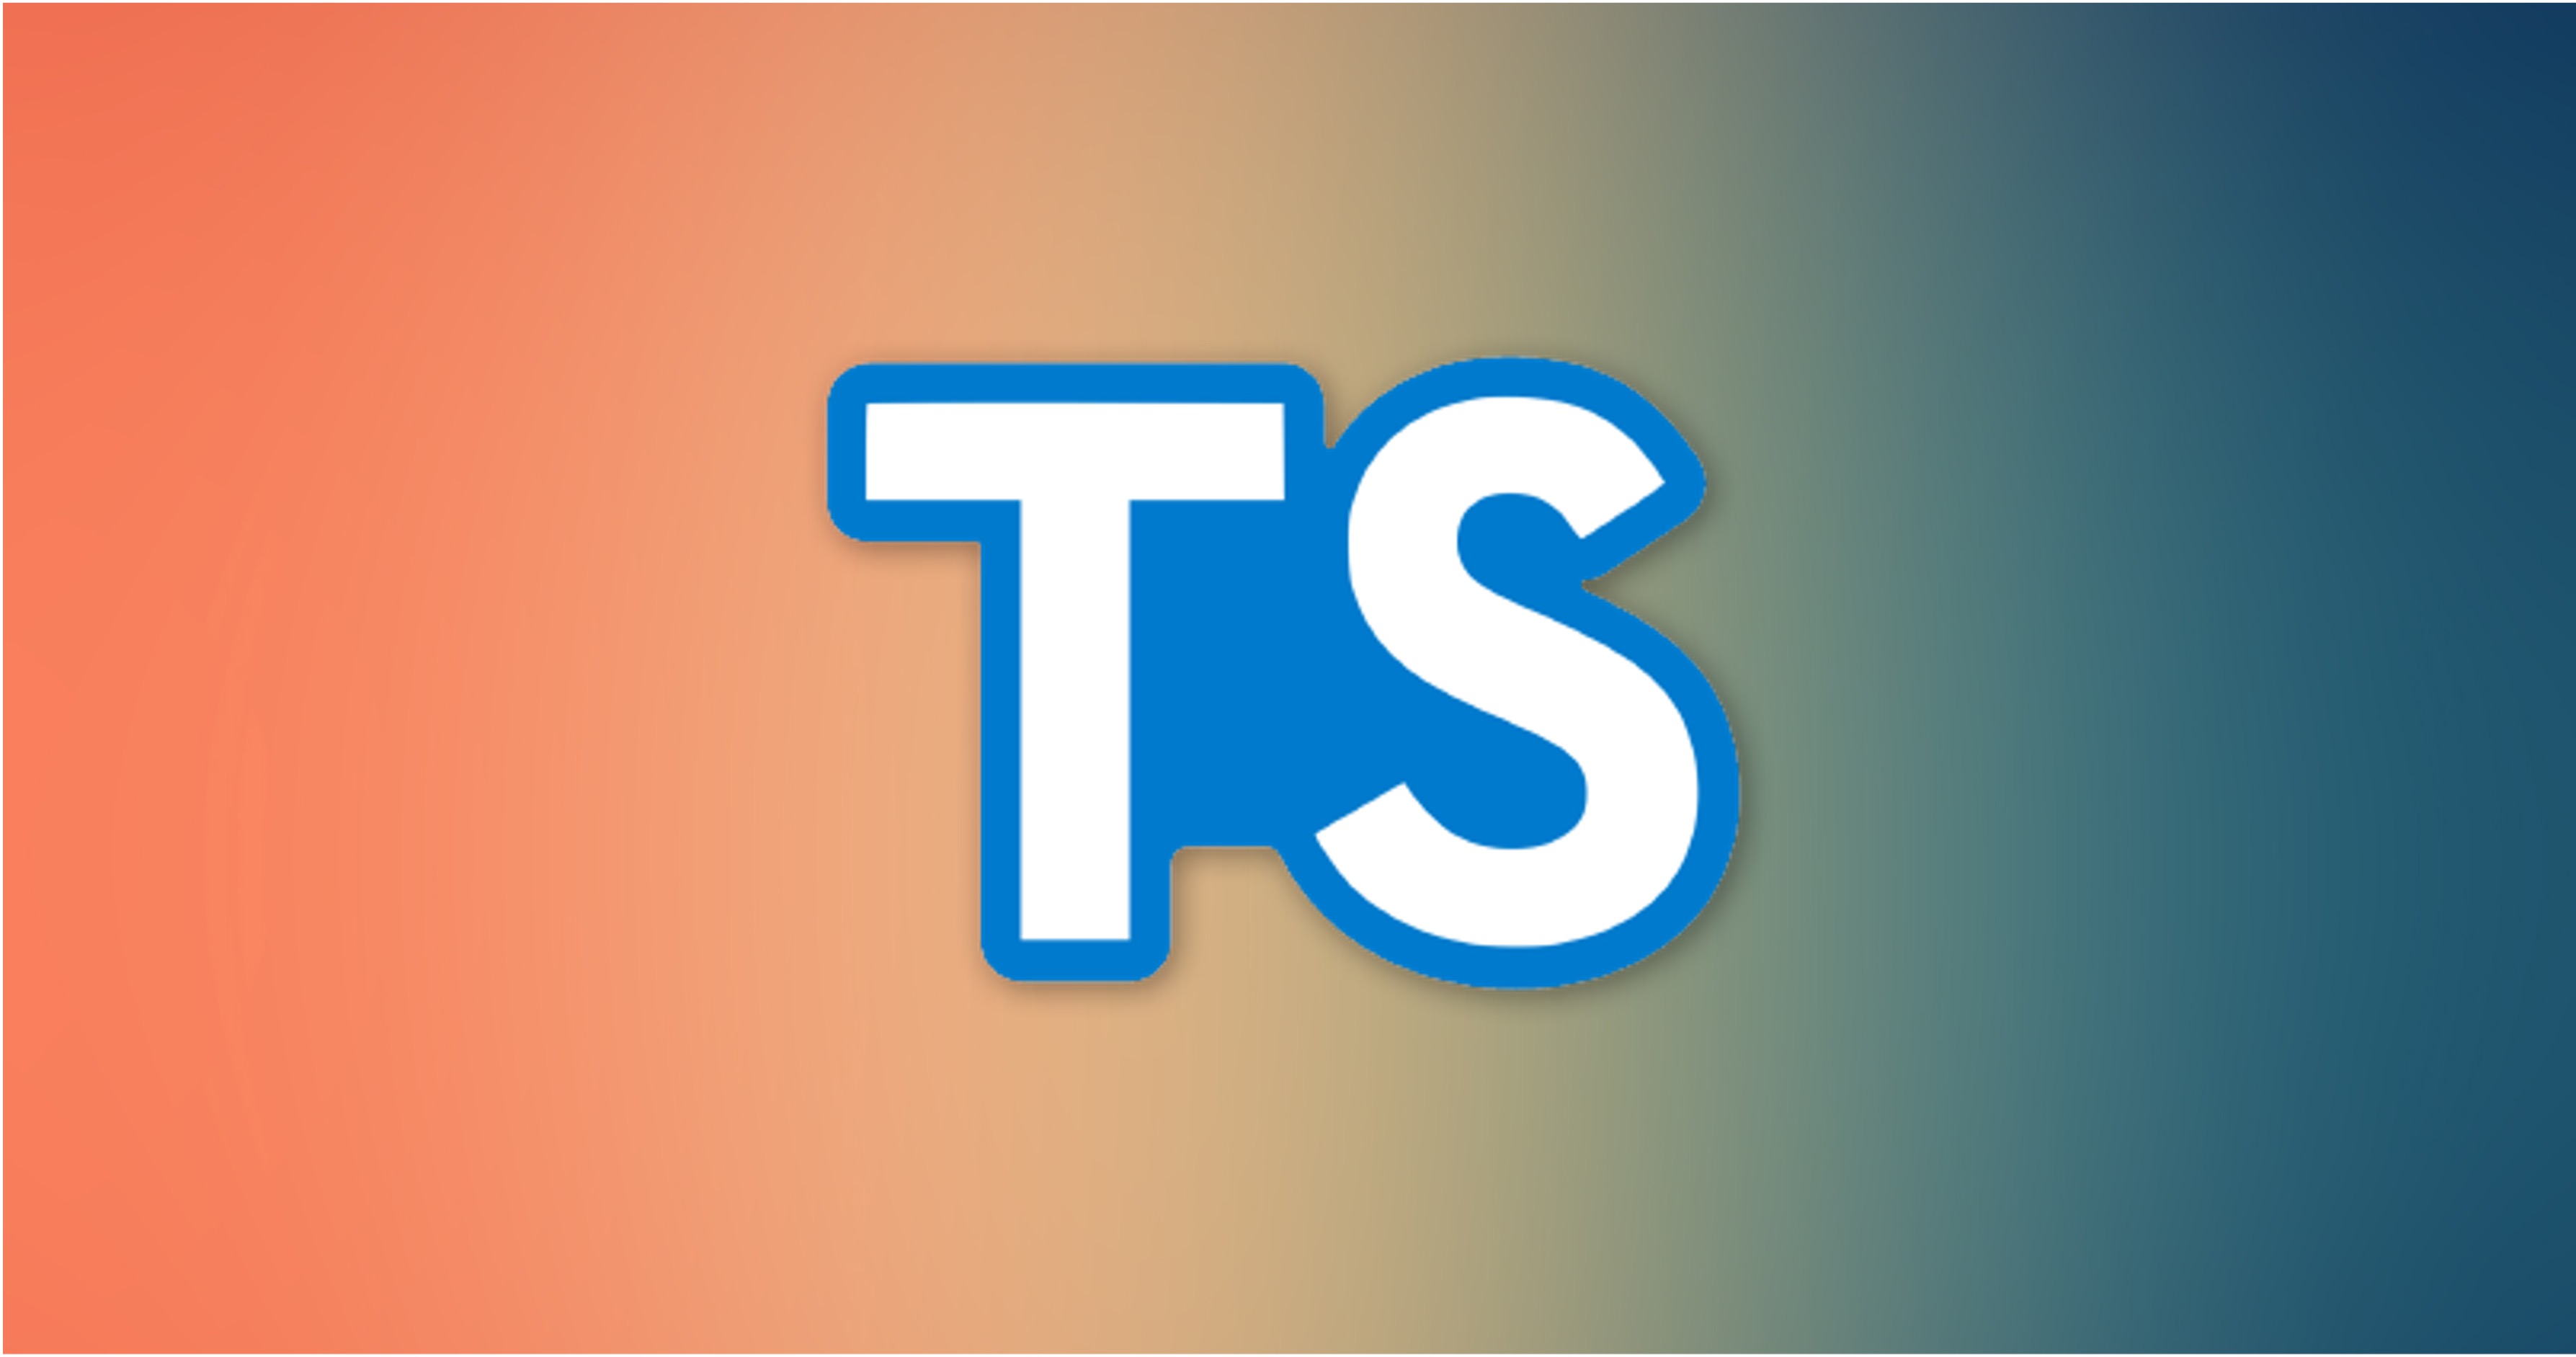 TypeScript's logo on a blue and orange gradient background